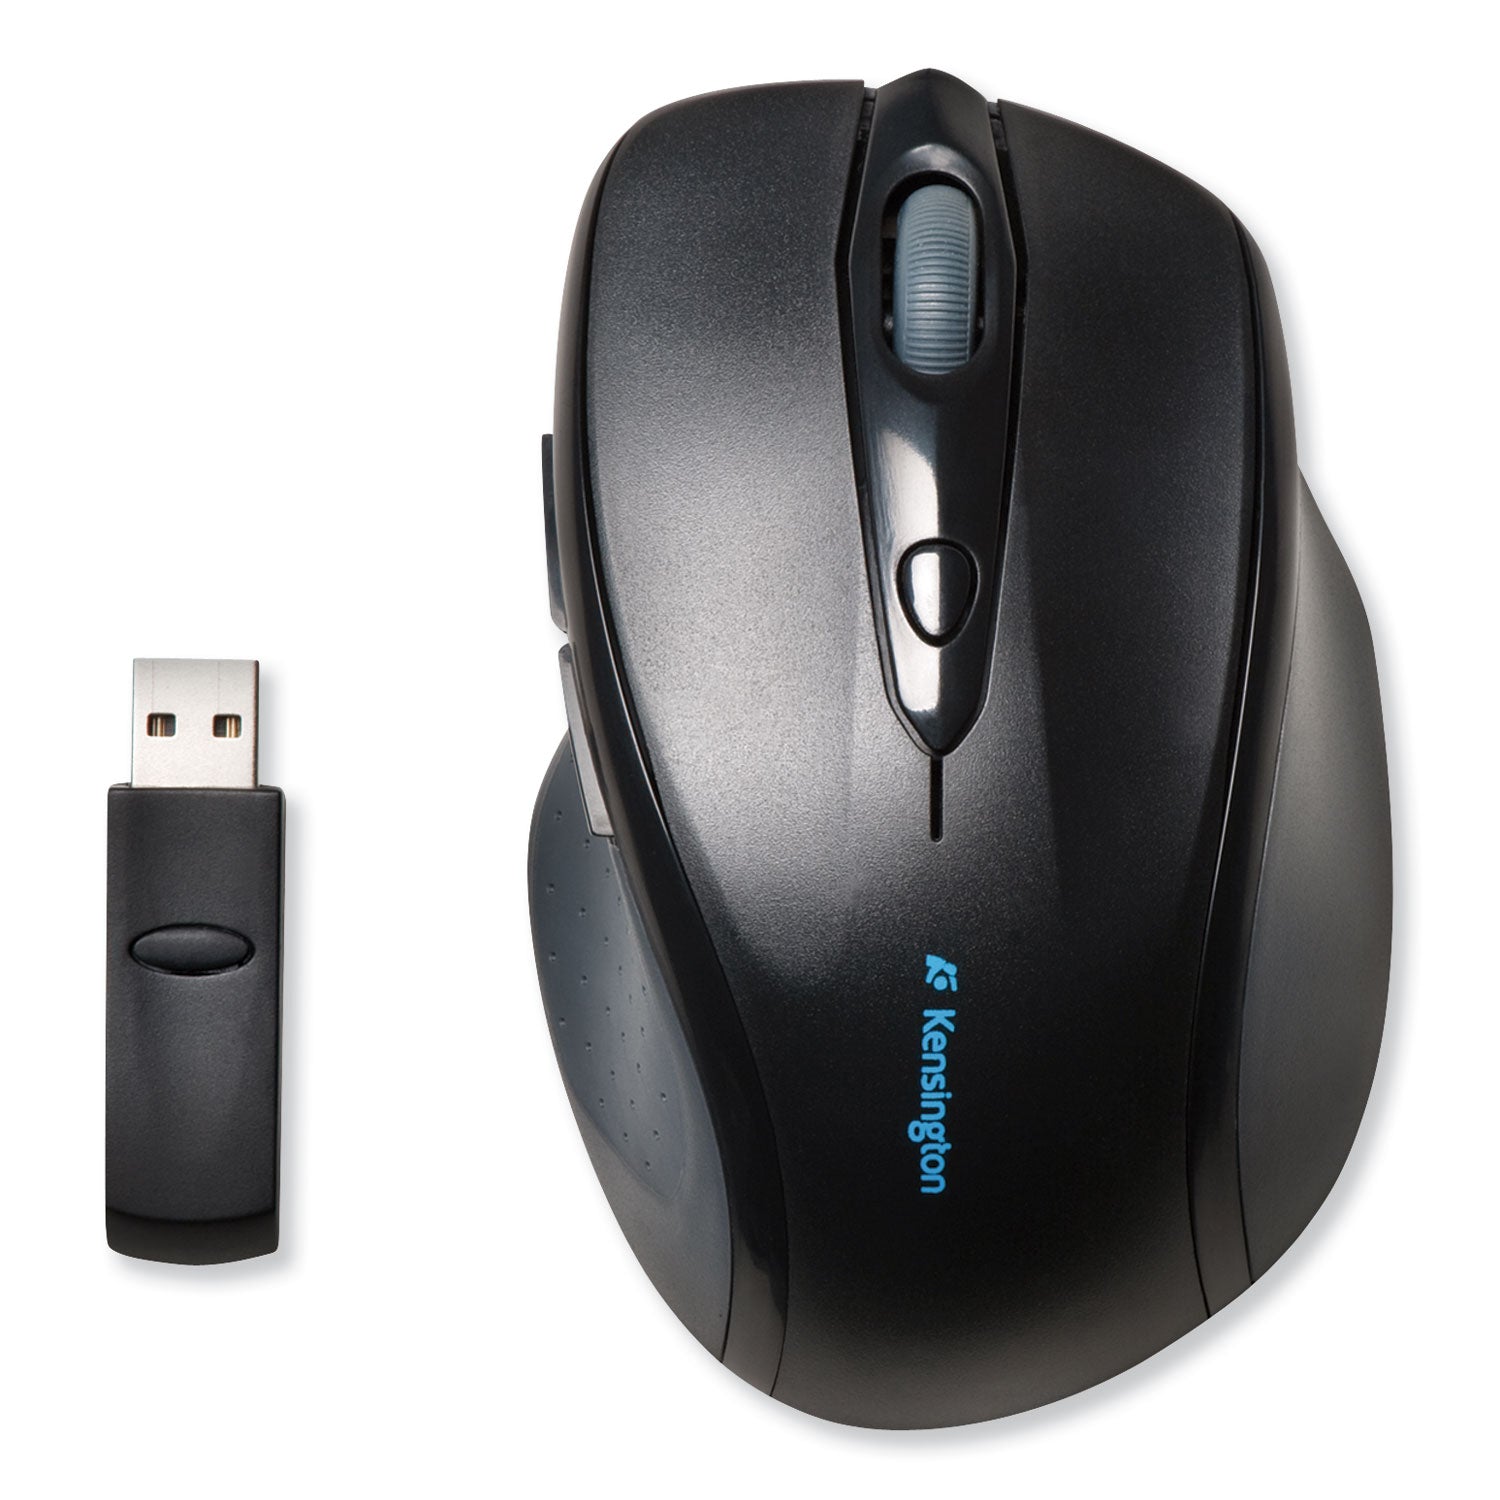 Pro Fit Full-Size Wireless Mouse, 2.4 GHz Frequency/30 ft Wireless Range, Right Hand Use, Black - 